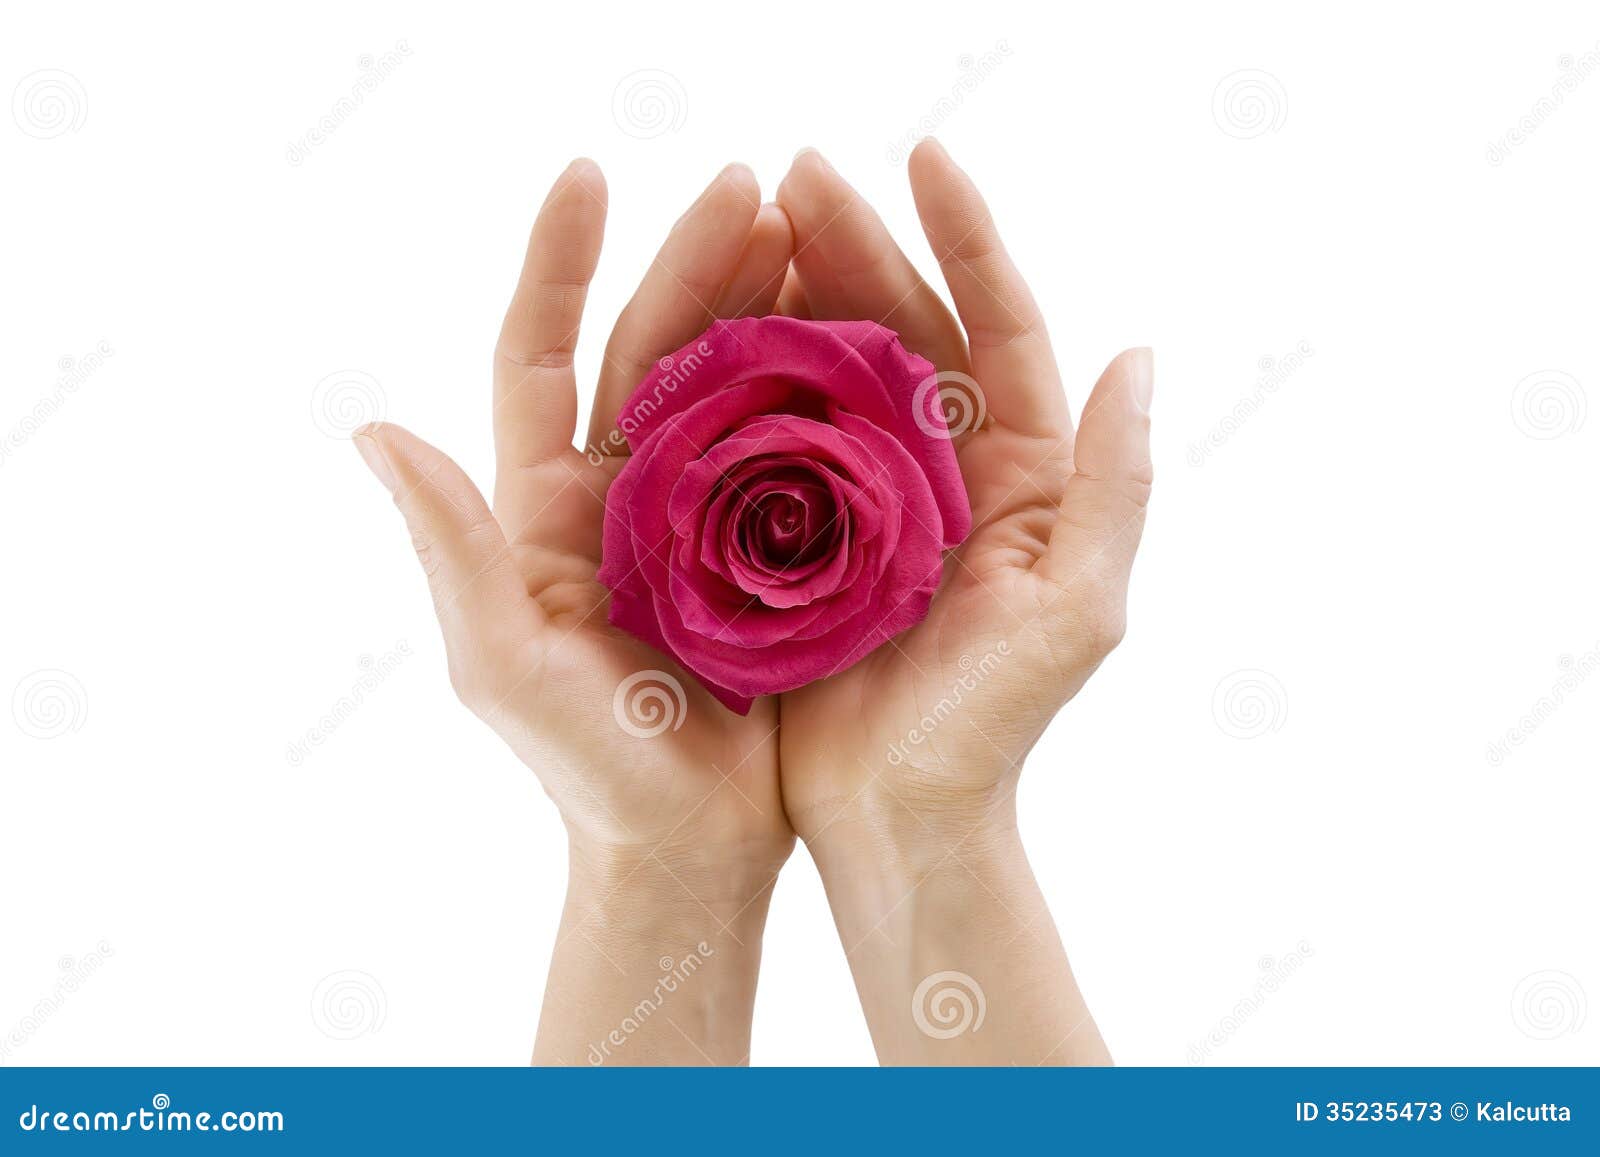 Female Hands Holding Rose On White Isolated, Close-up Stock Photos ...